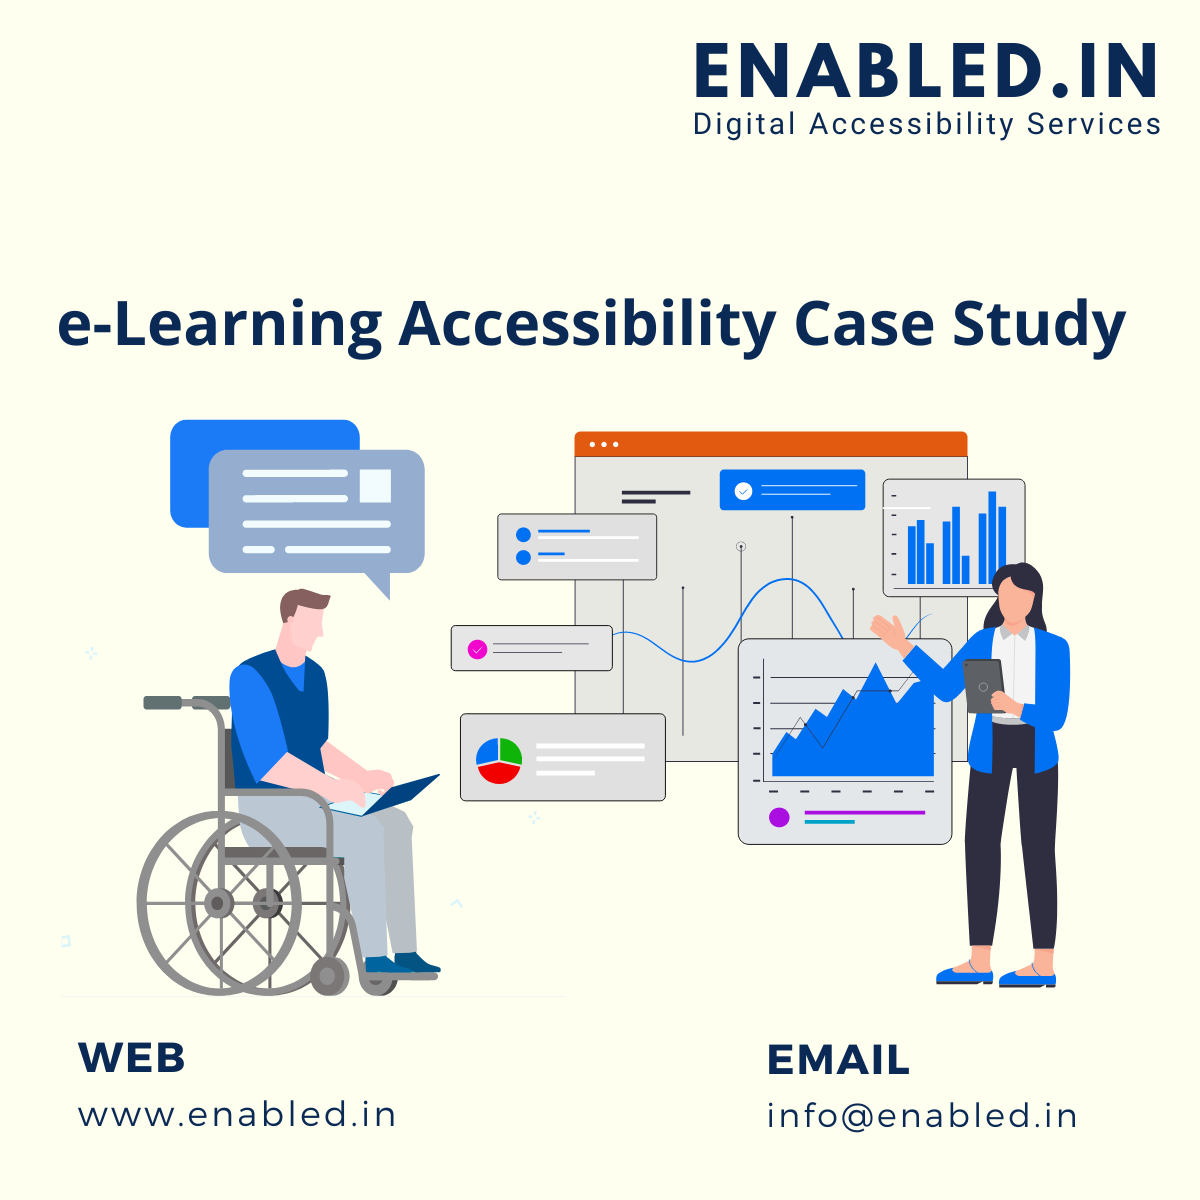 e-learning accessibility casestudies ADA 508 WCAG